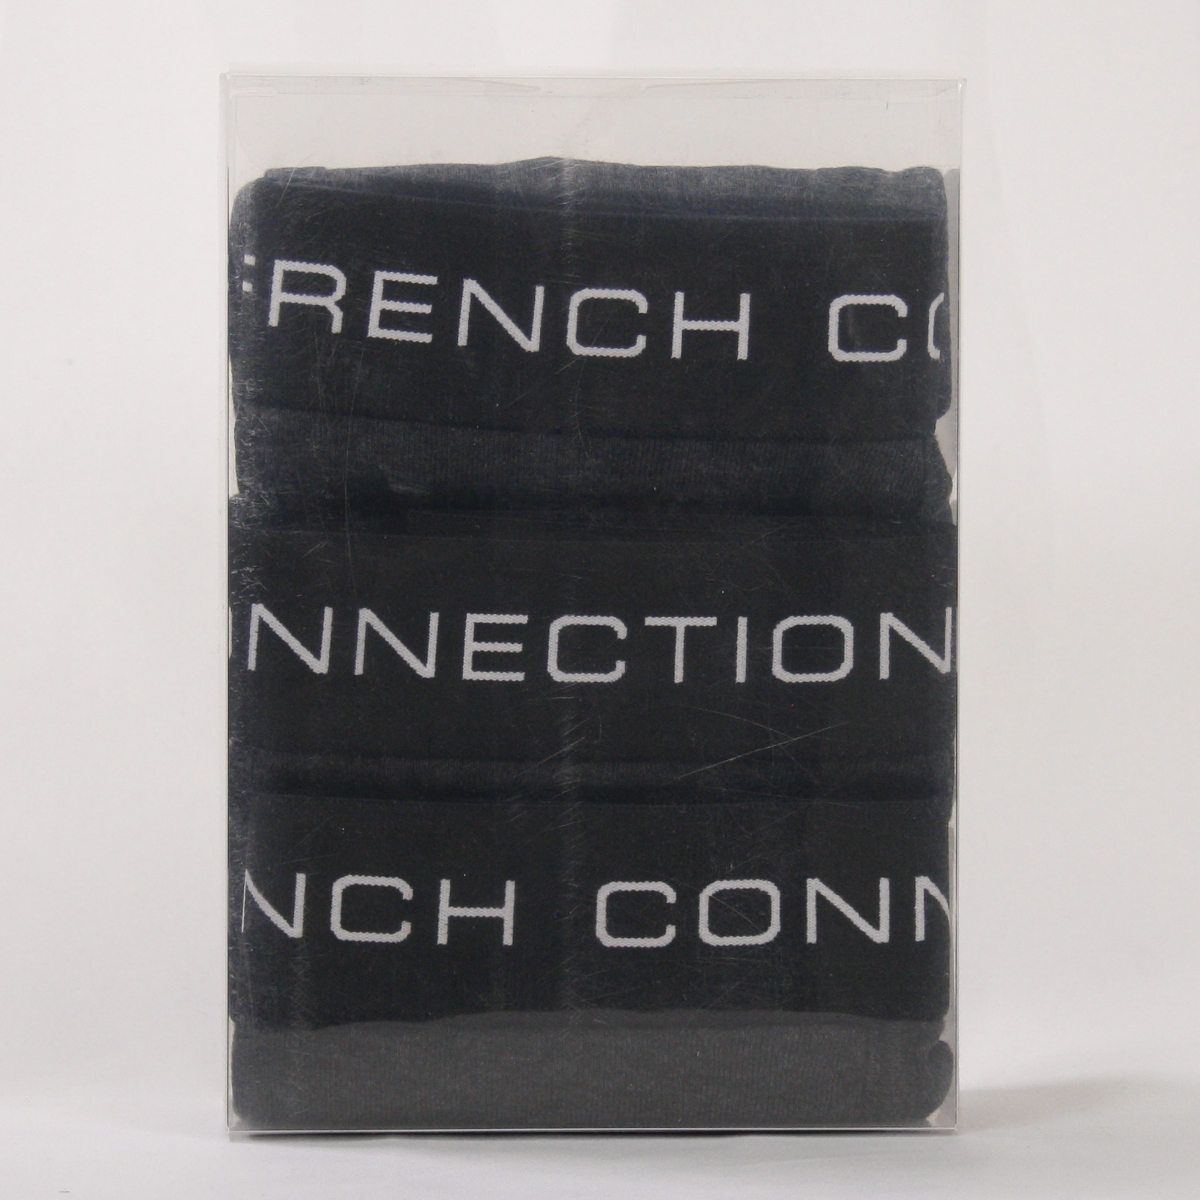 French Connection Men's 3 Pack Dark Grey w/ Black Strap Boxer Brief (S03)